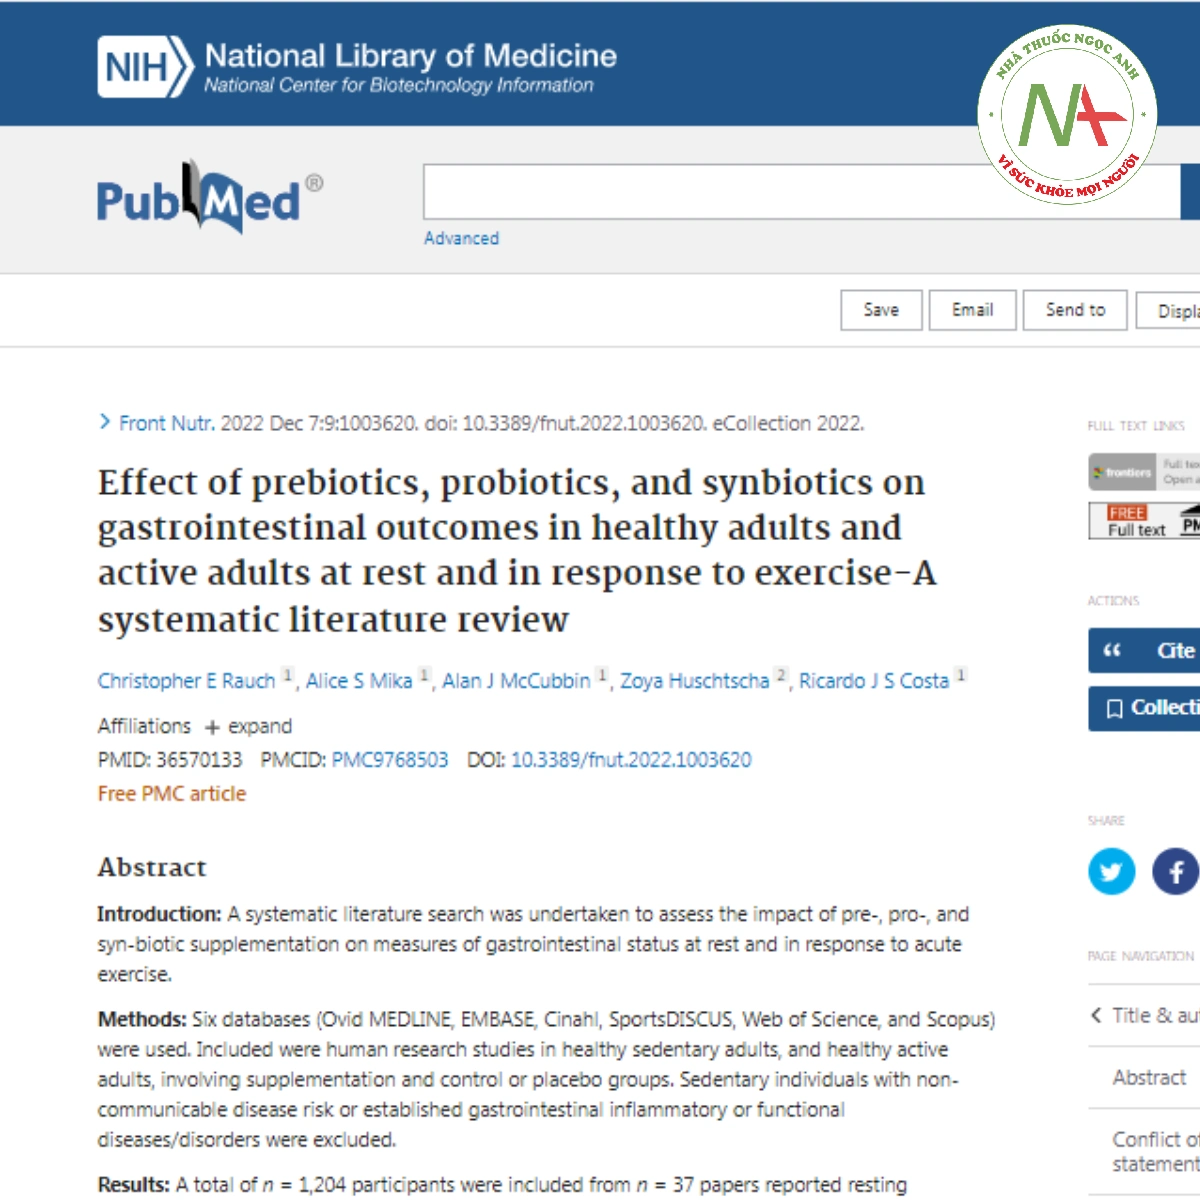 Effect of prebiotics, probiotics, and synbiotics on gastrointestinal outcomes in healthy adults and active adults at rest and in response to exercise-A systematic literature review